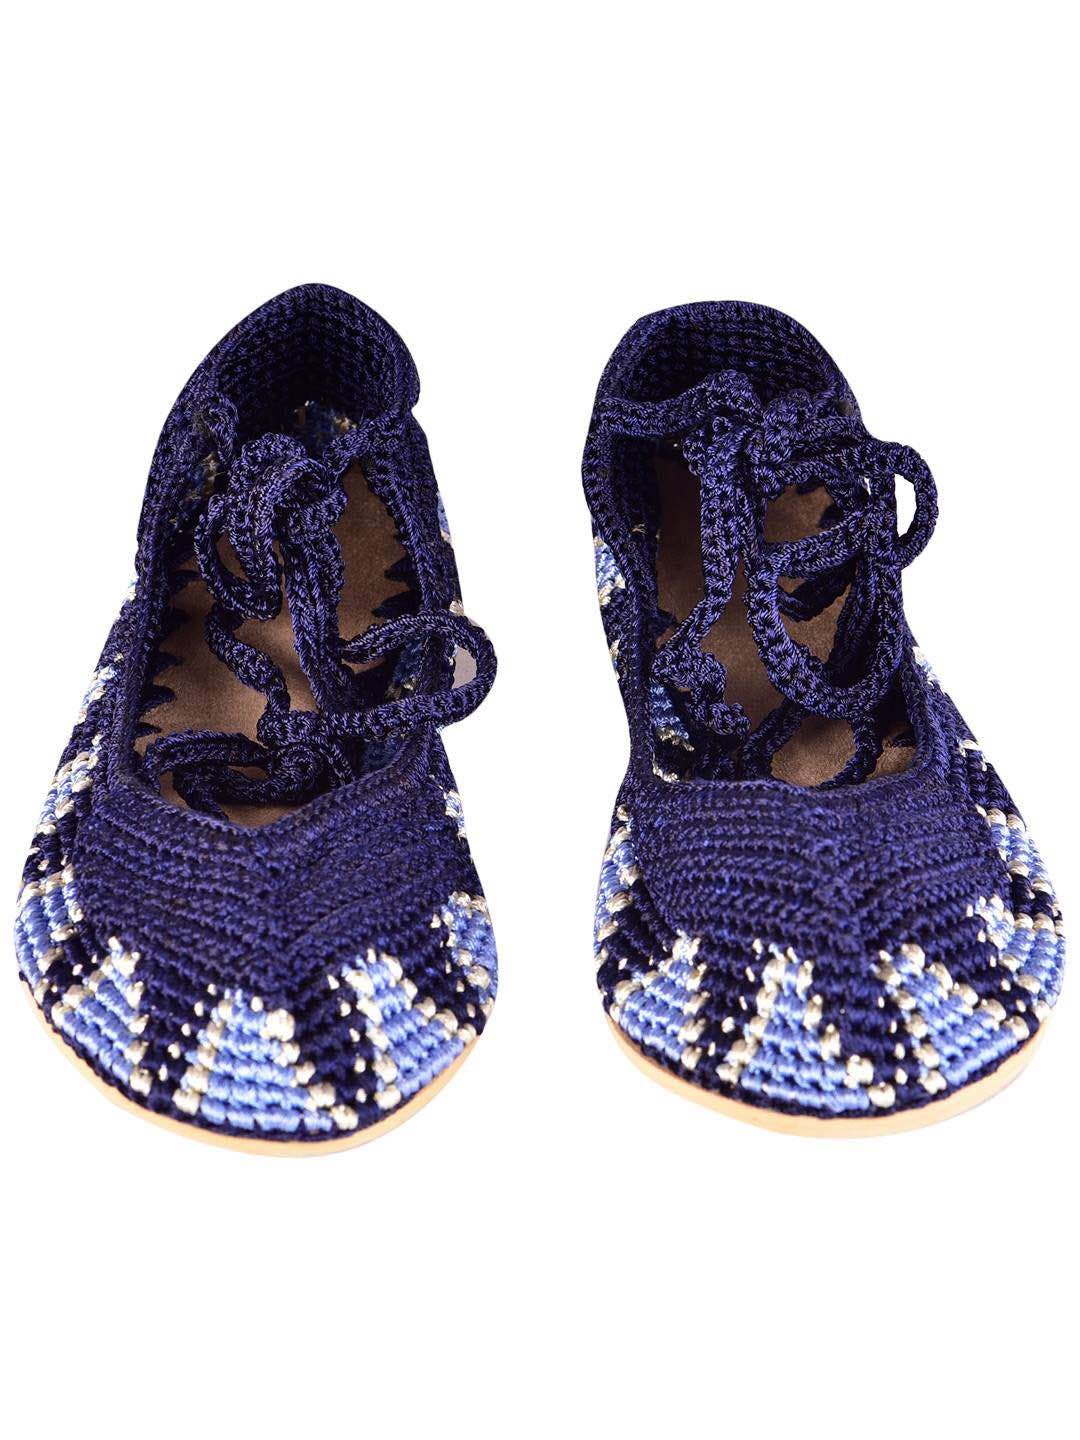 Footwear,Product,Blue,Shoe,Baby & toddler shoe,Cobalt blue,Purple,Mary jane,Violet,Baby Products